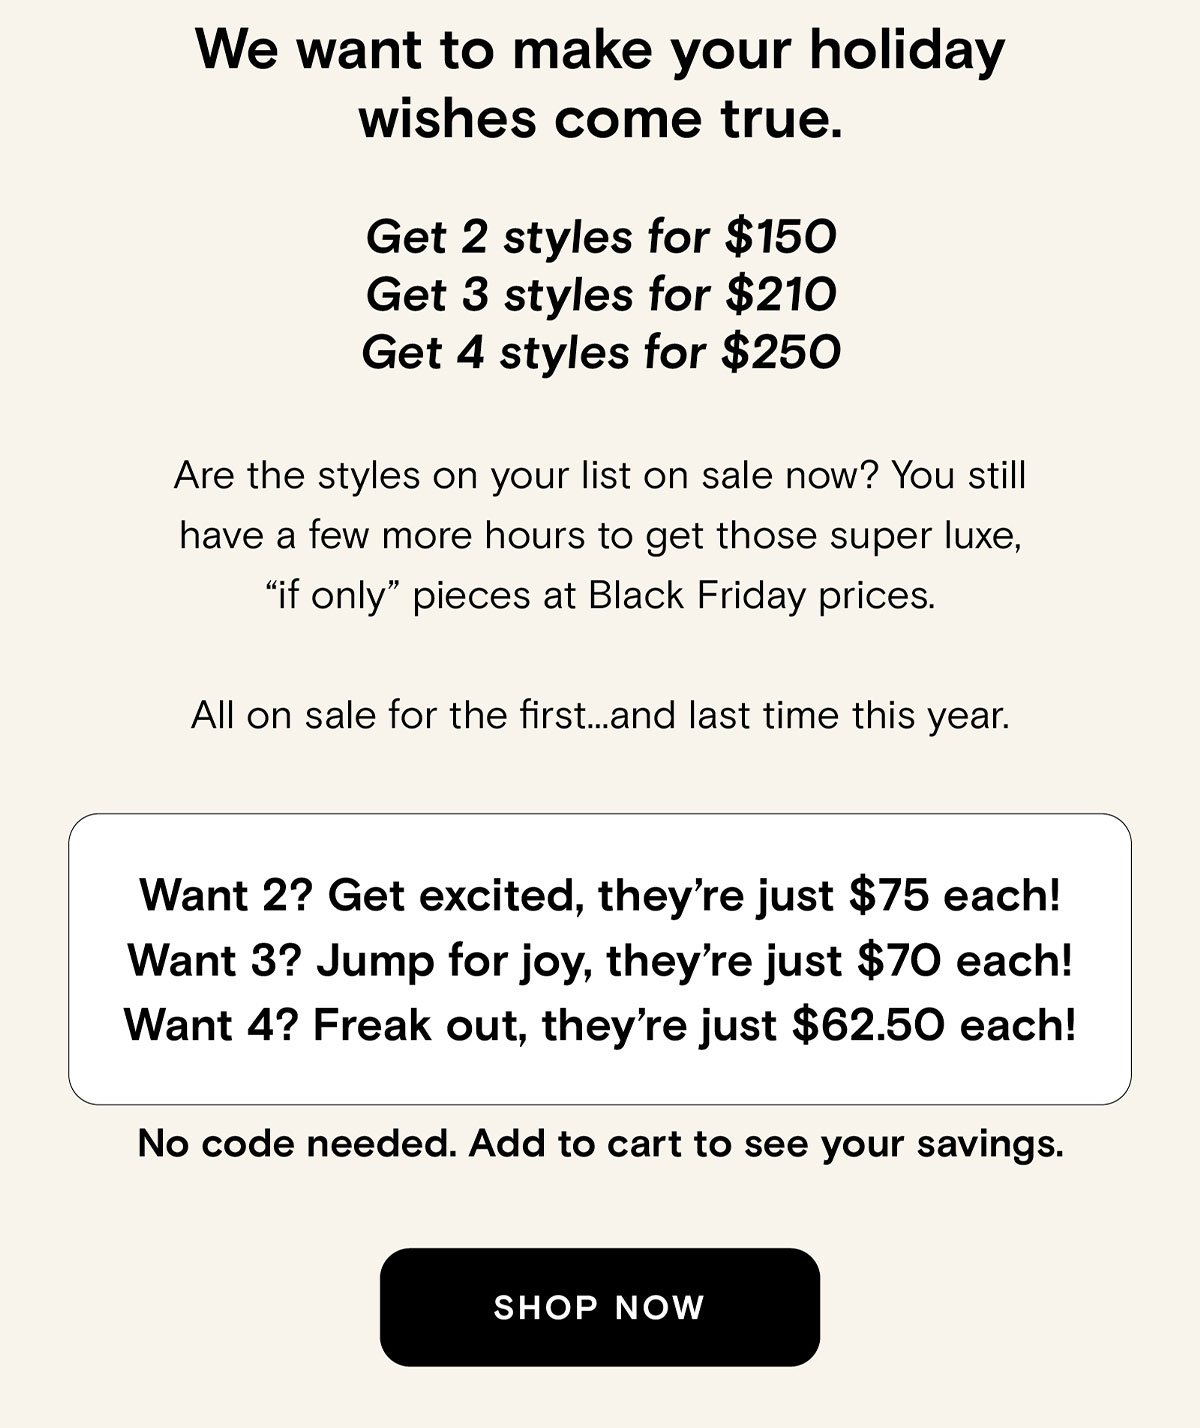 Buy more and save more - as low as $62.50 per style!